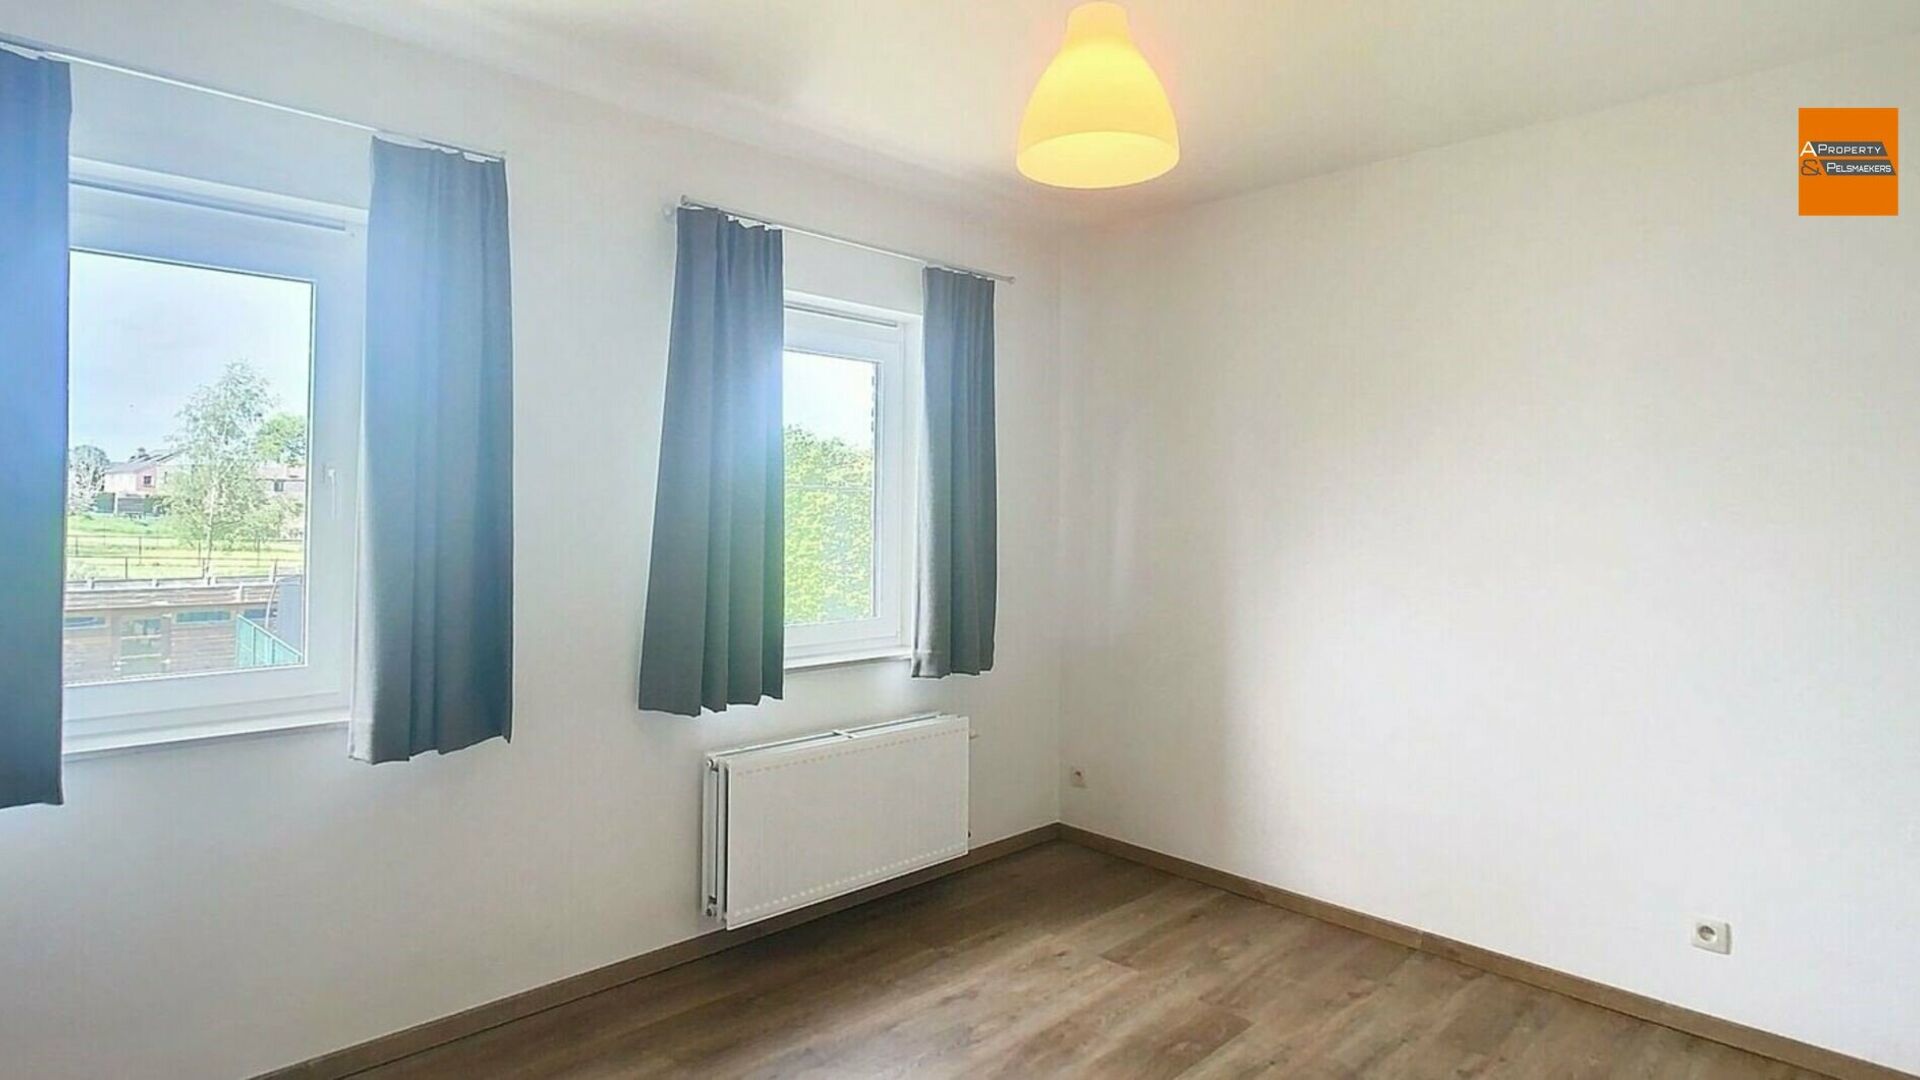 House for rent in DUISBURG